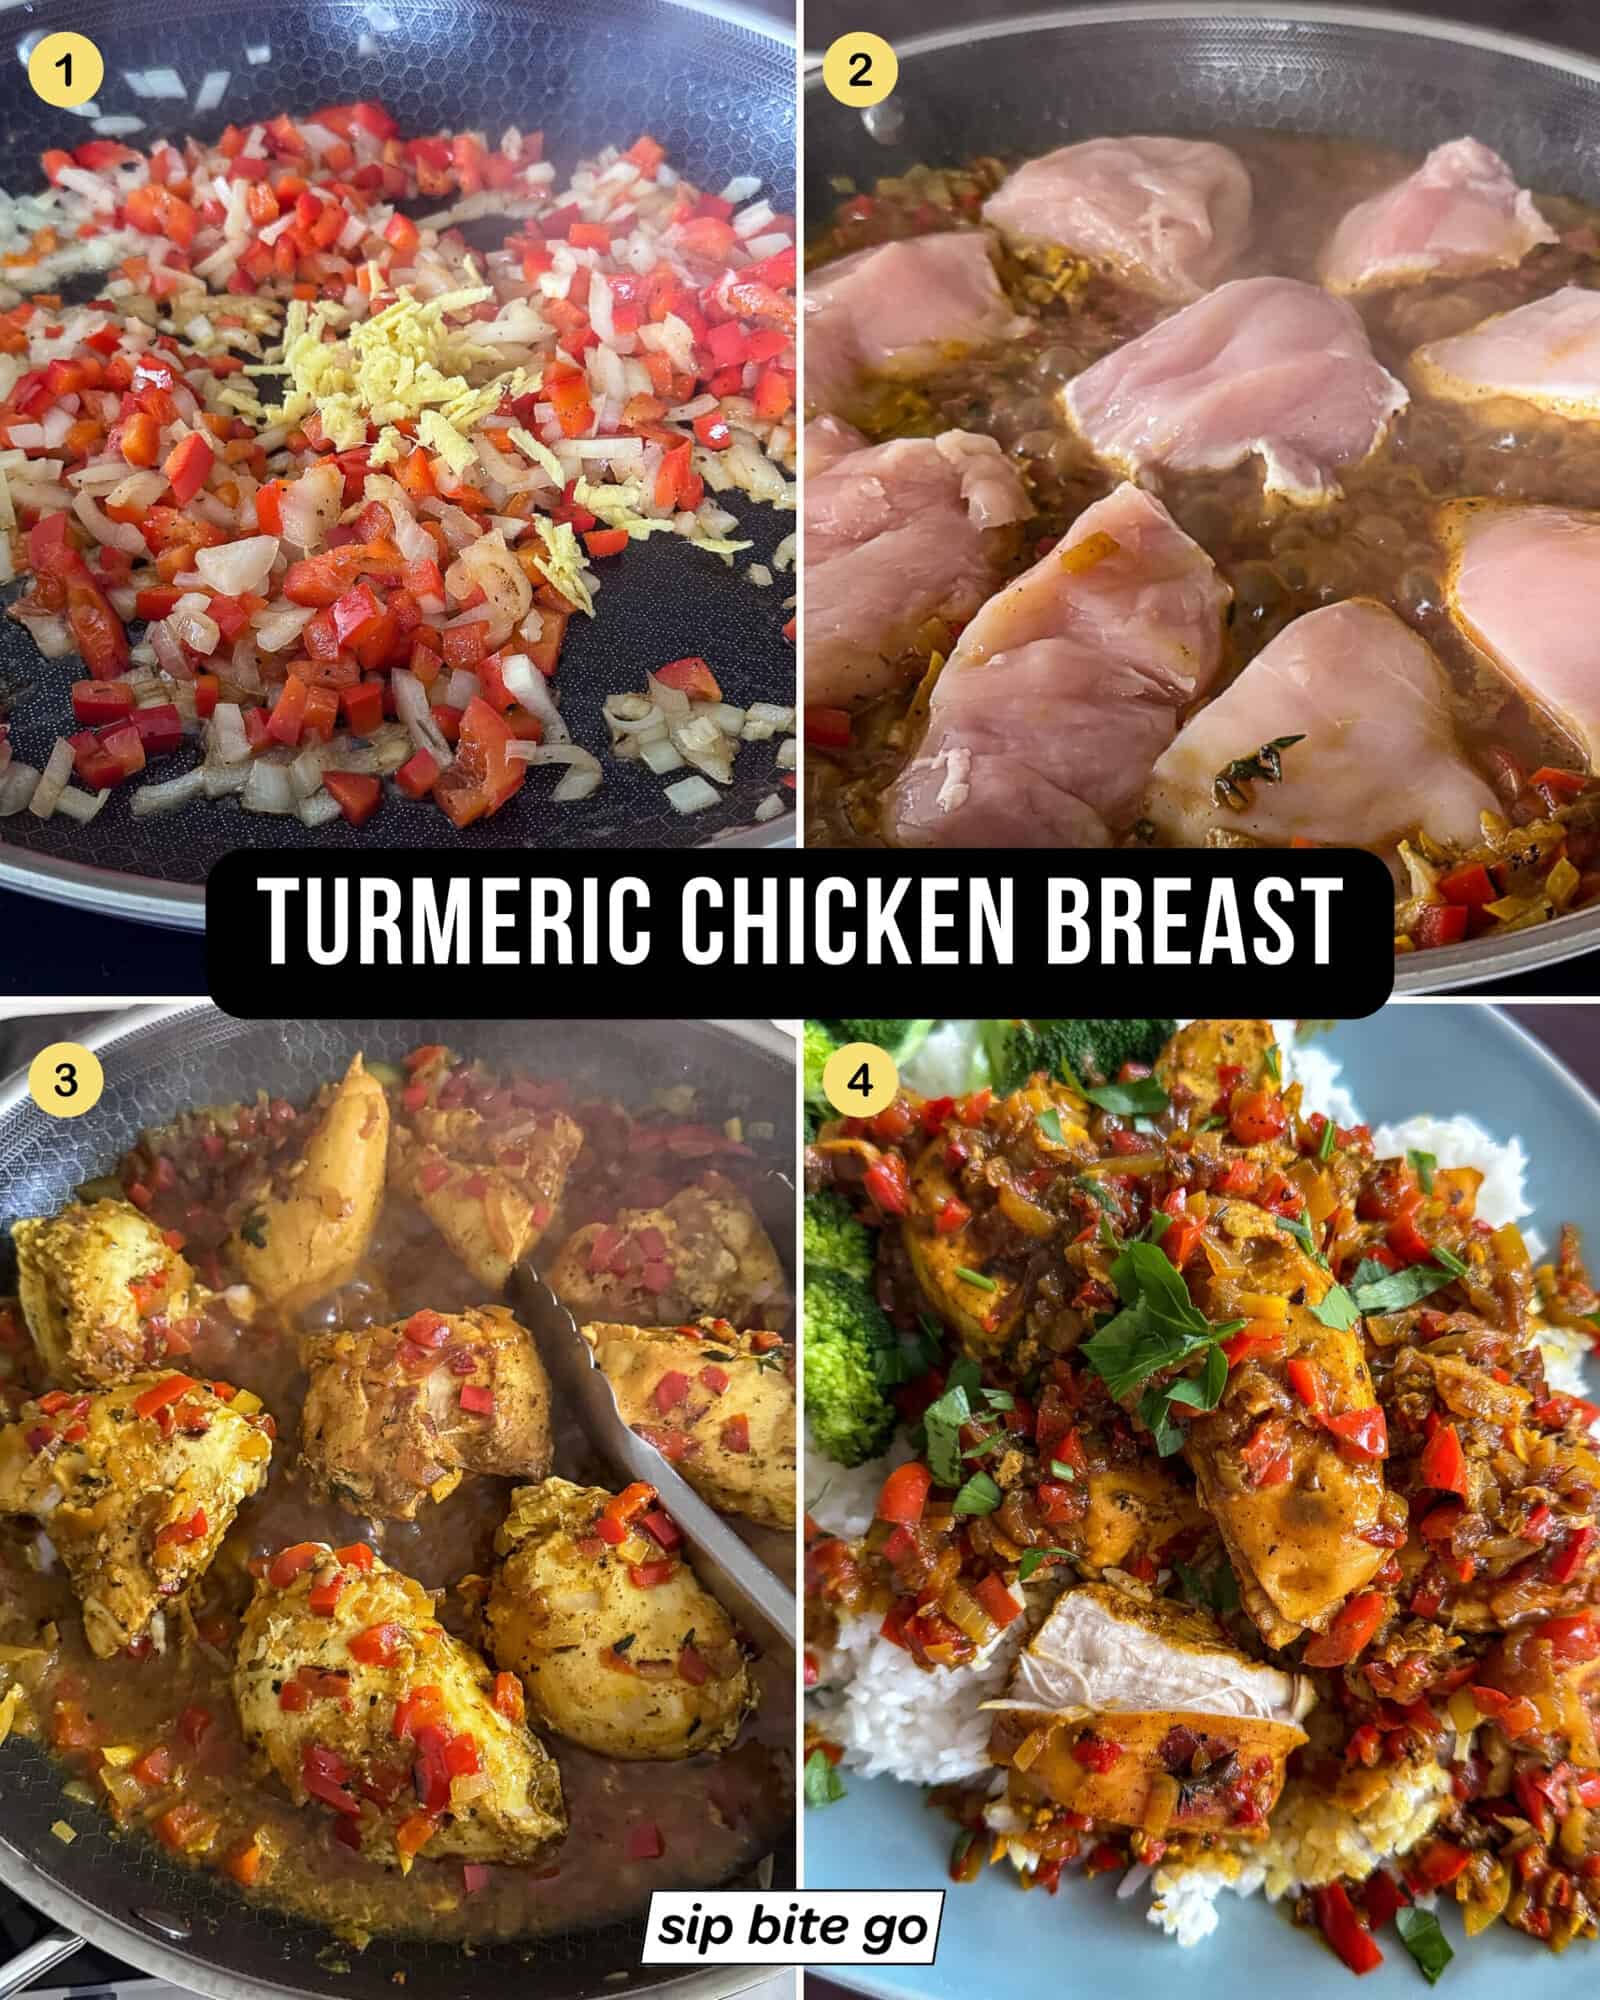 RECIPE steps for cooking turmeric chicken breast